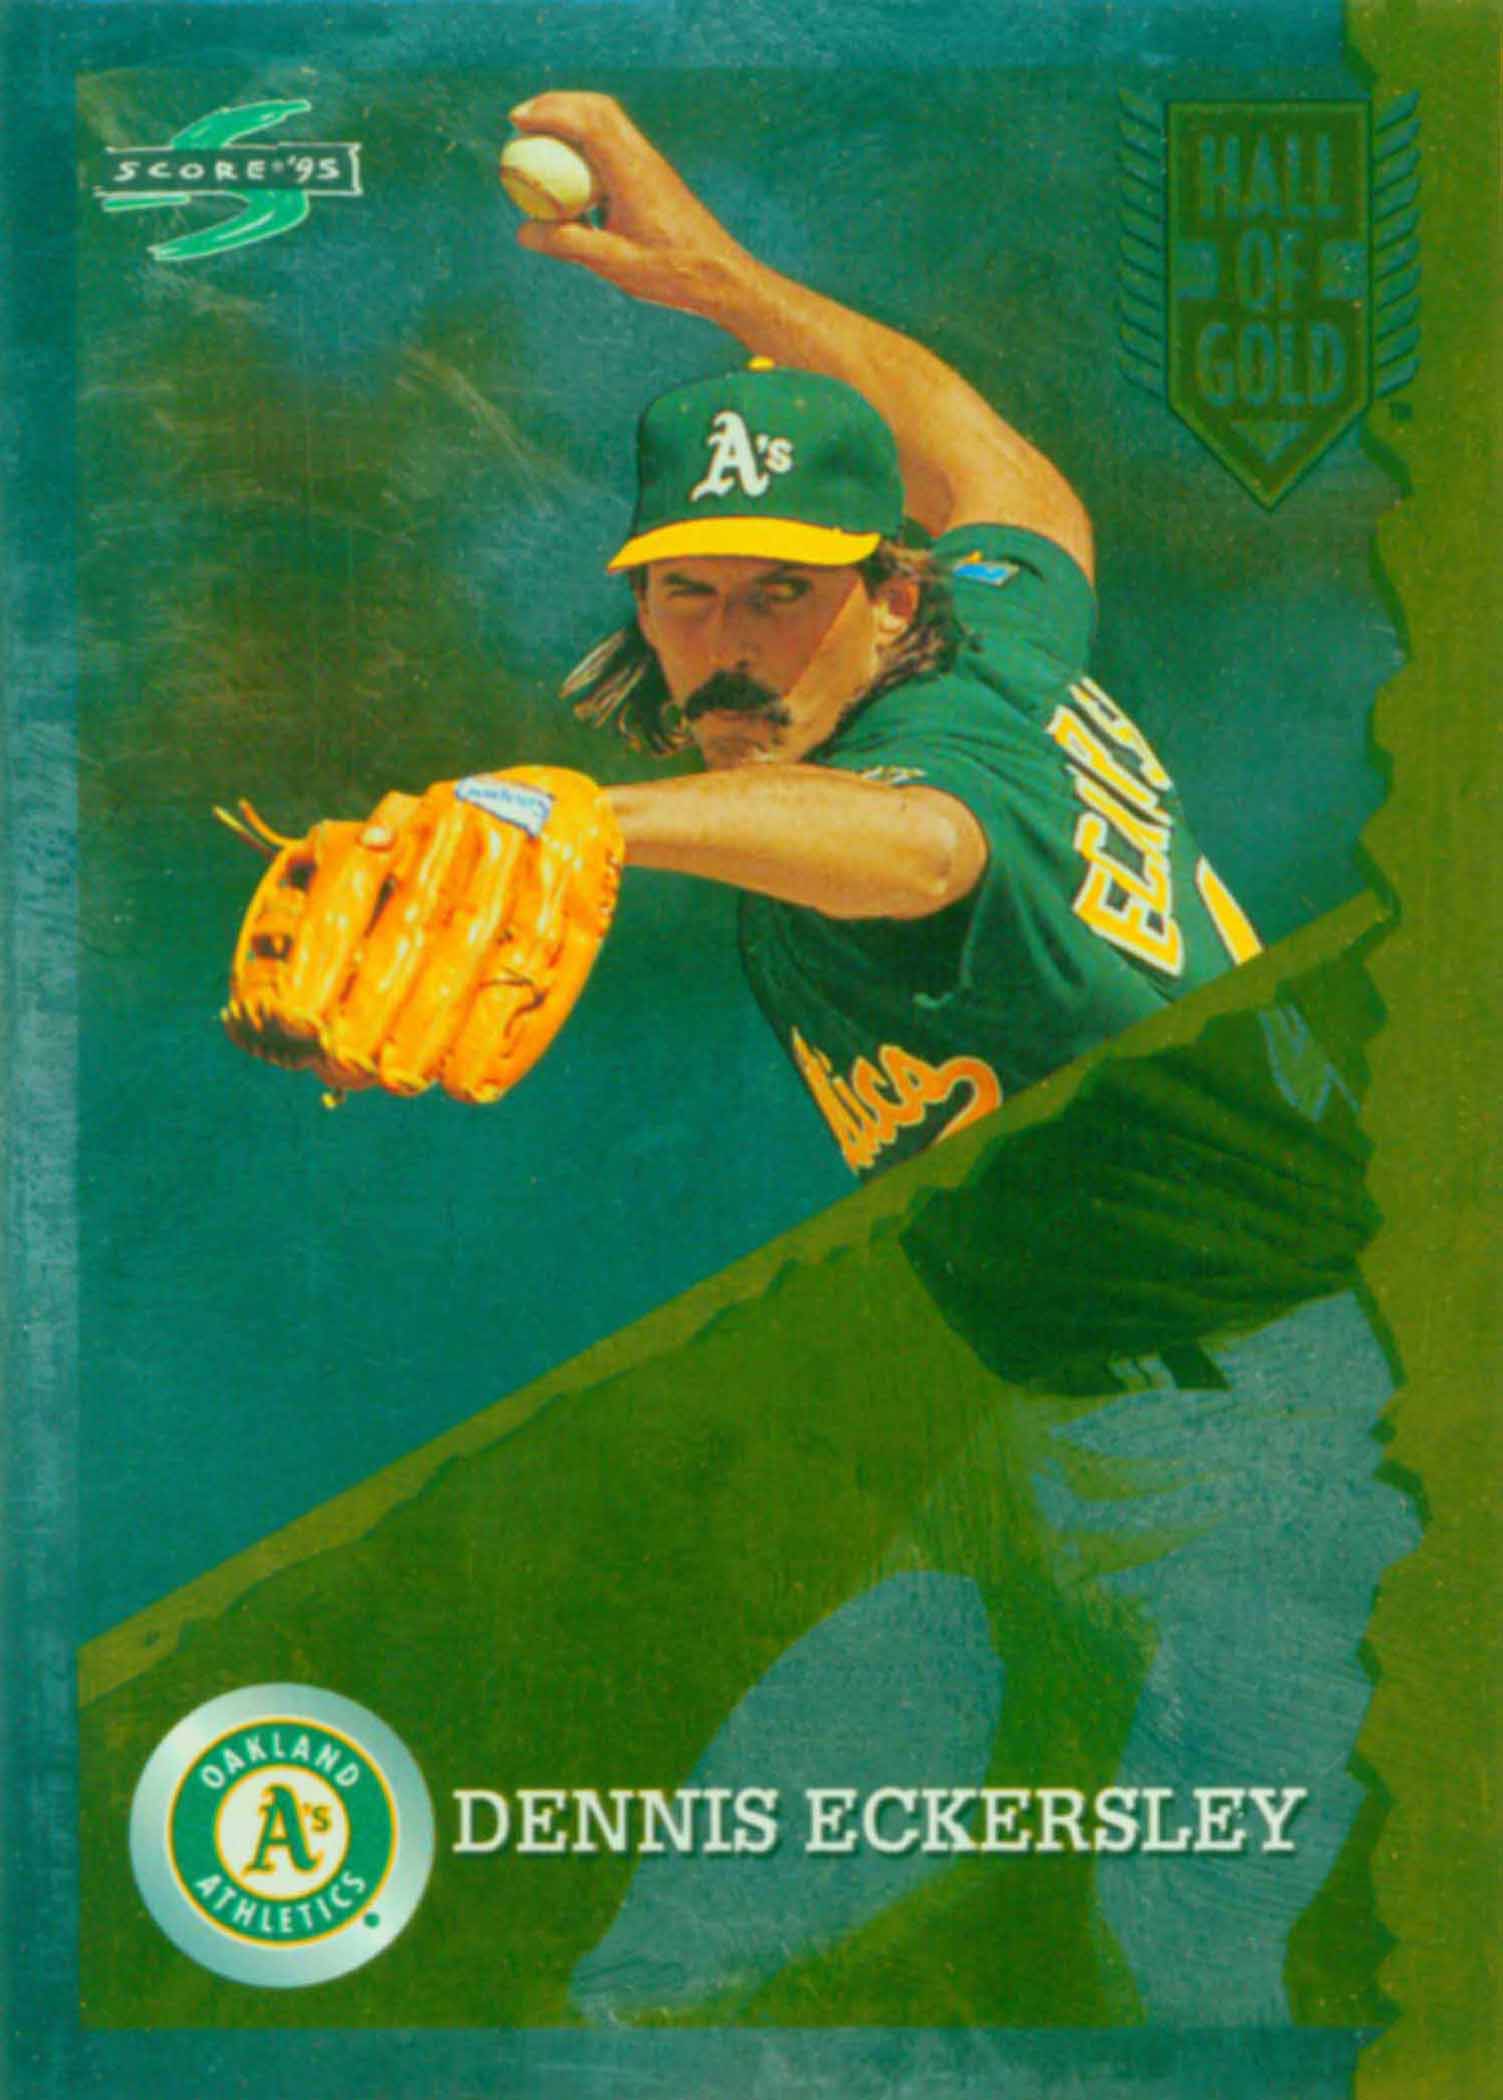 1995 Score Hall of Gold